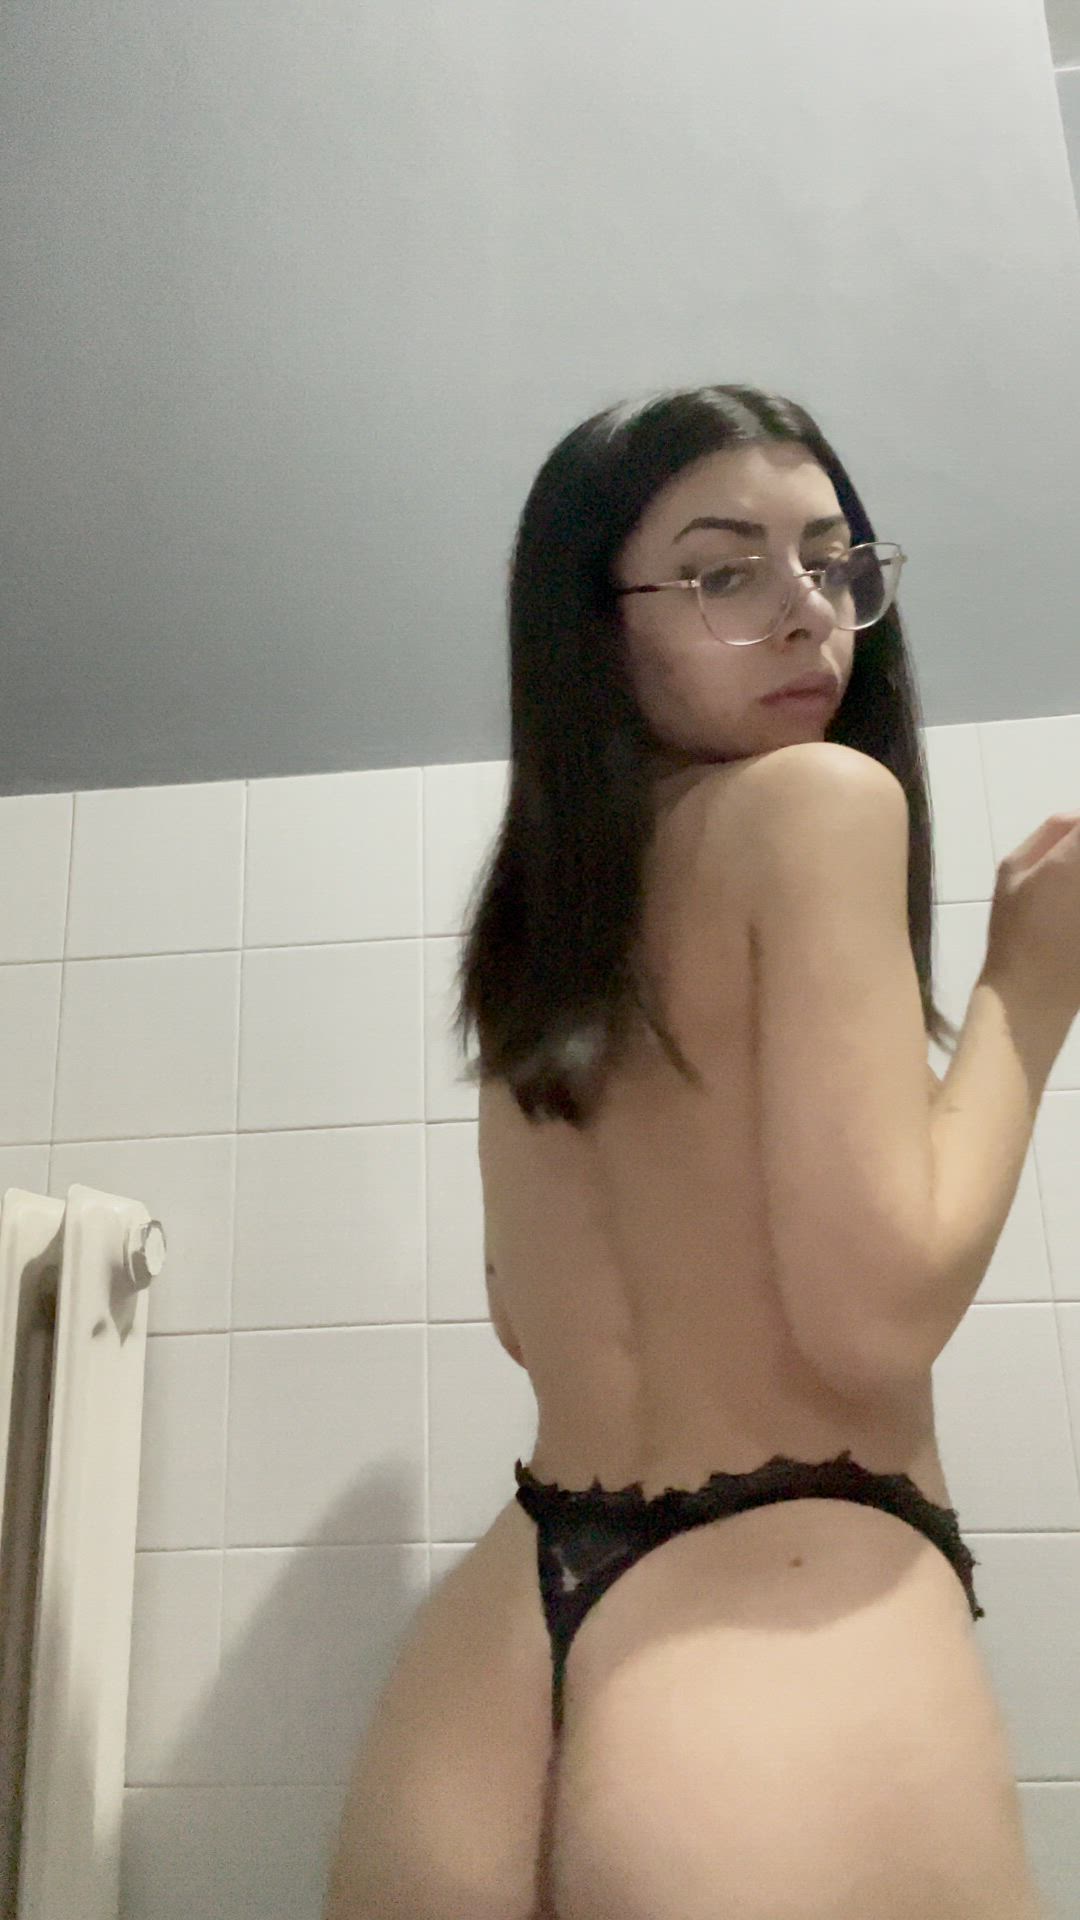 Ass porn video with onlyfans model aria4real <strong>@tiny_aria</strong>